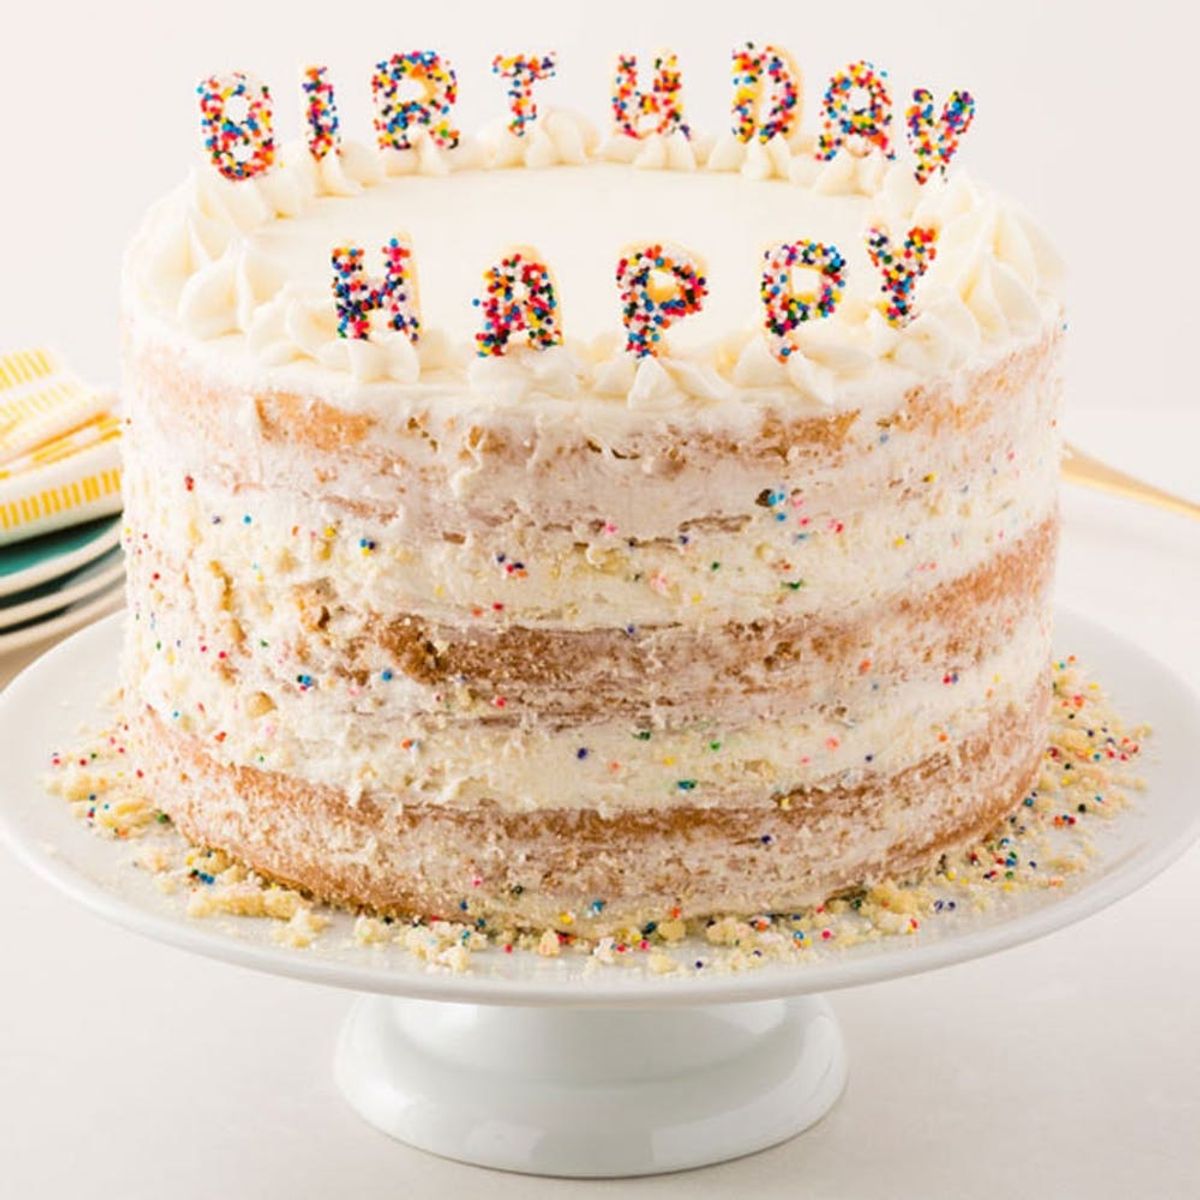 Get Happy With Our Sugar Cookie Funfetti Birthday Cake